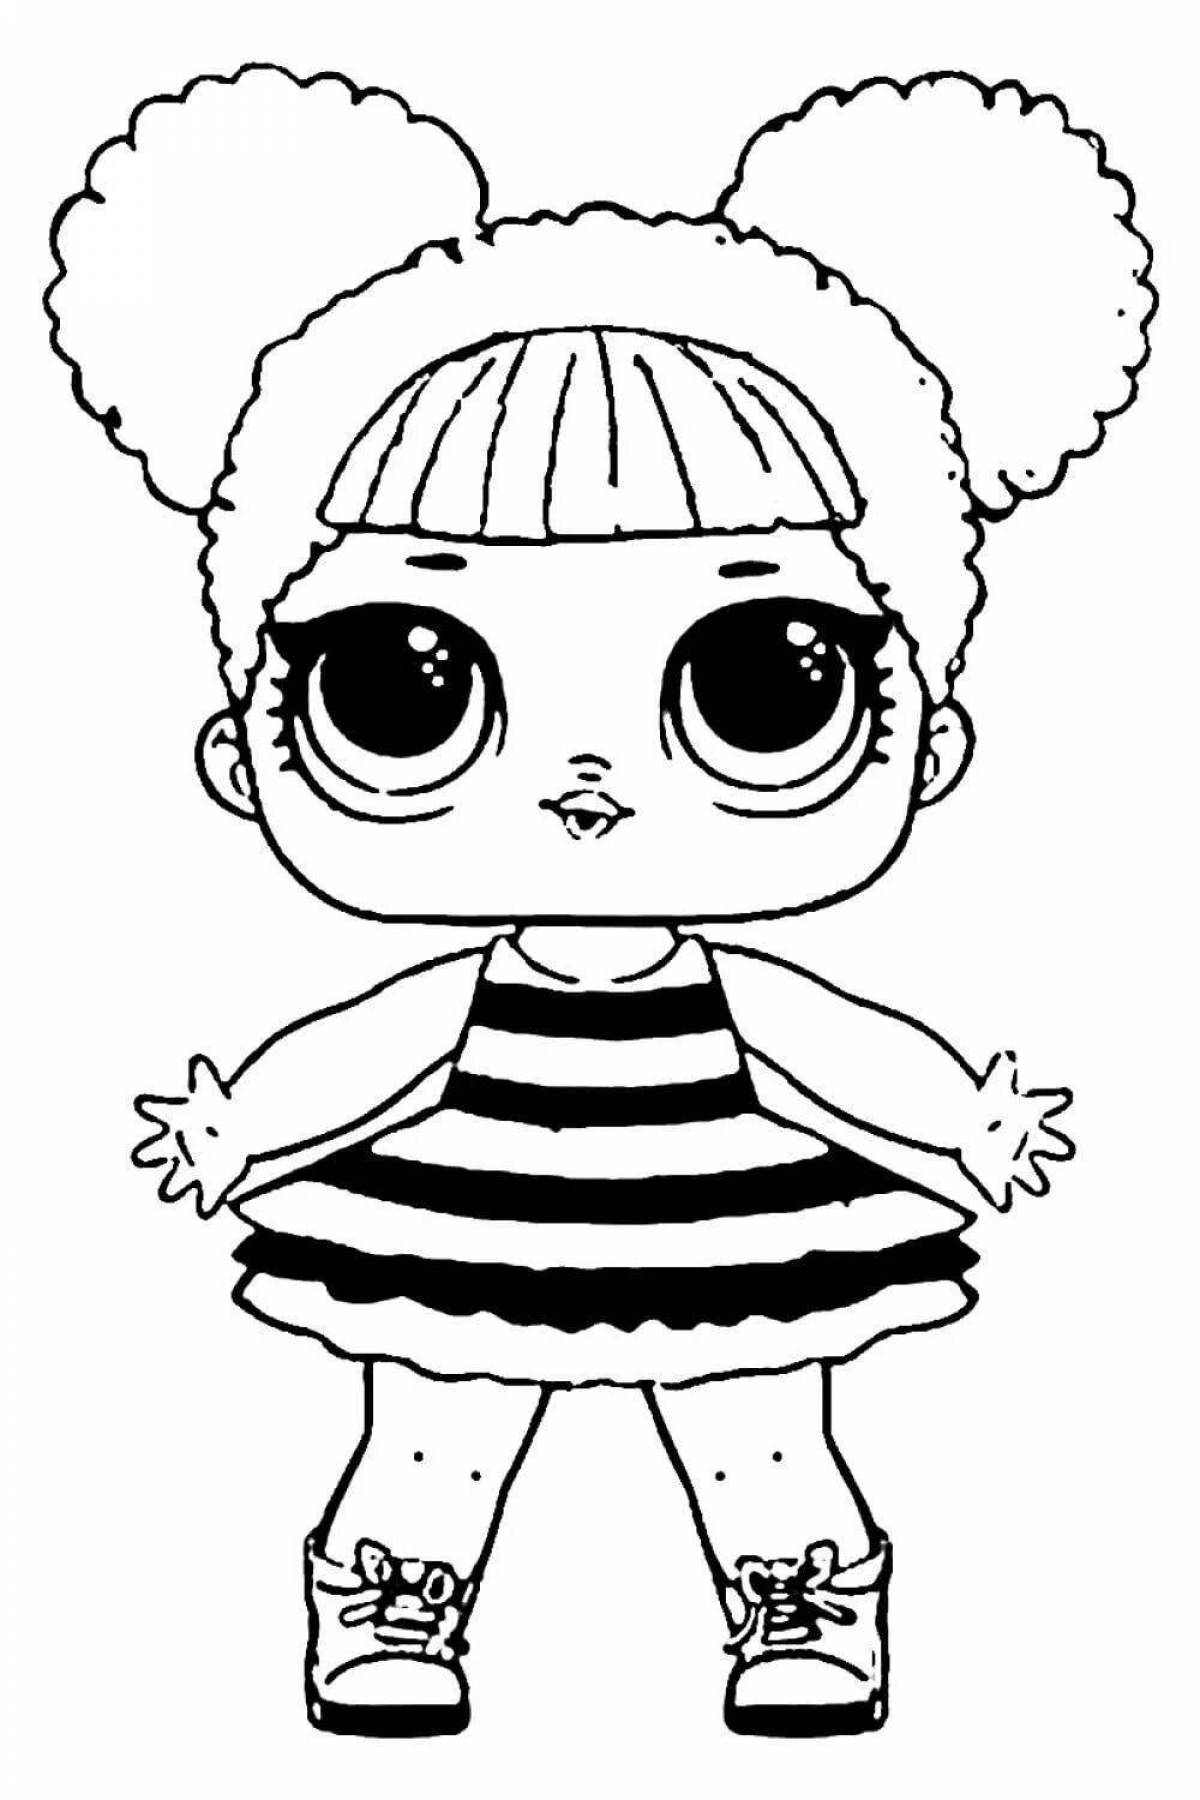 Lol doll wonderful coloring book for kids